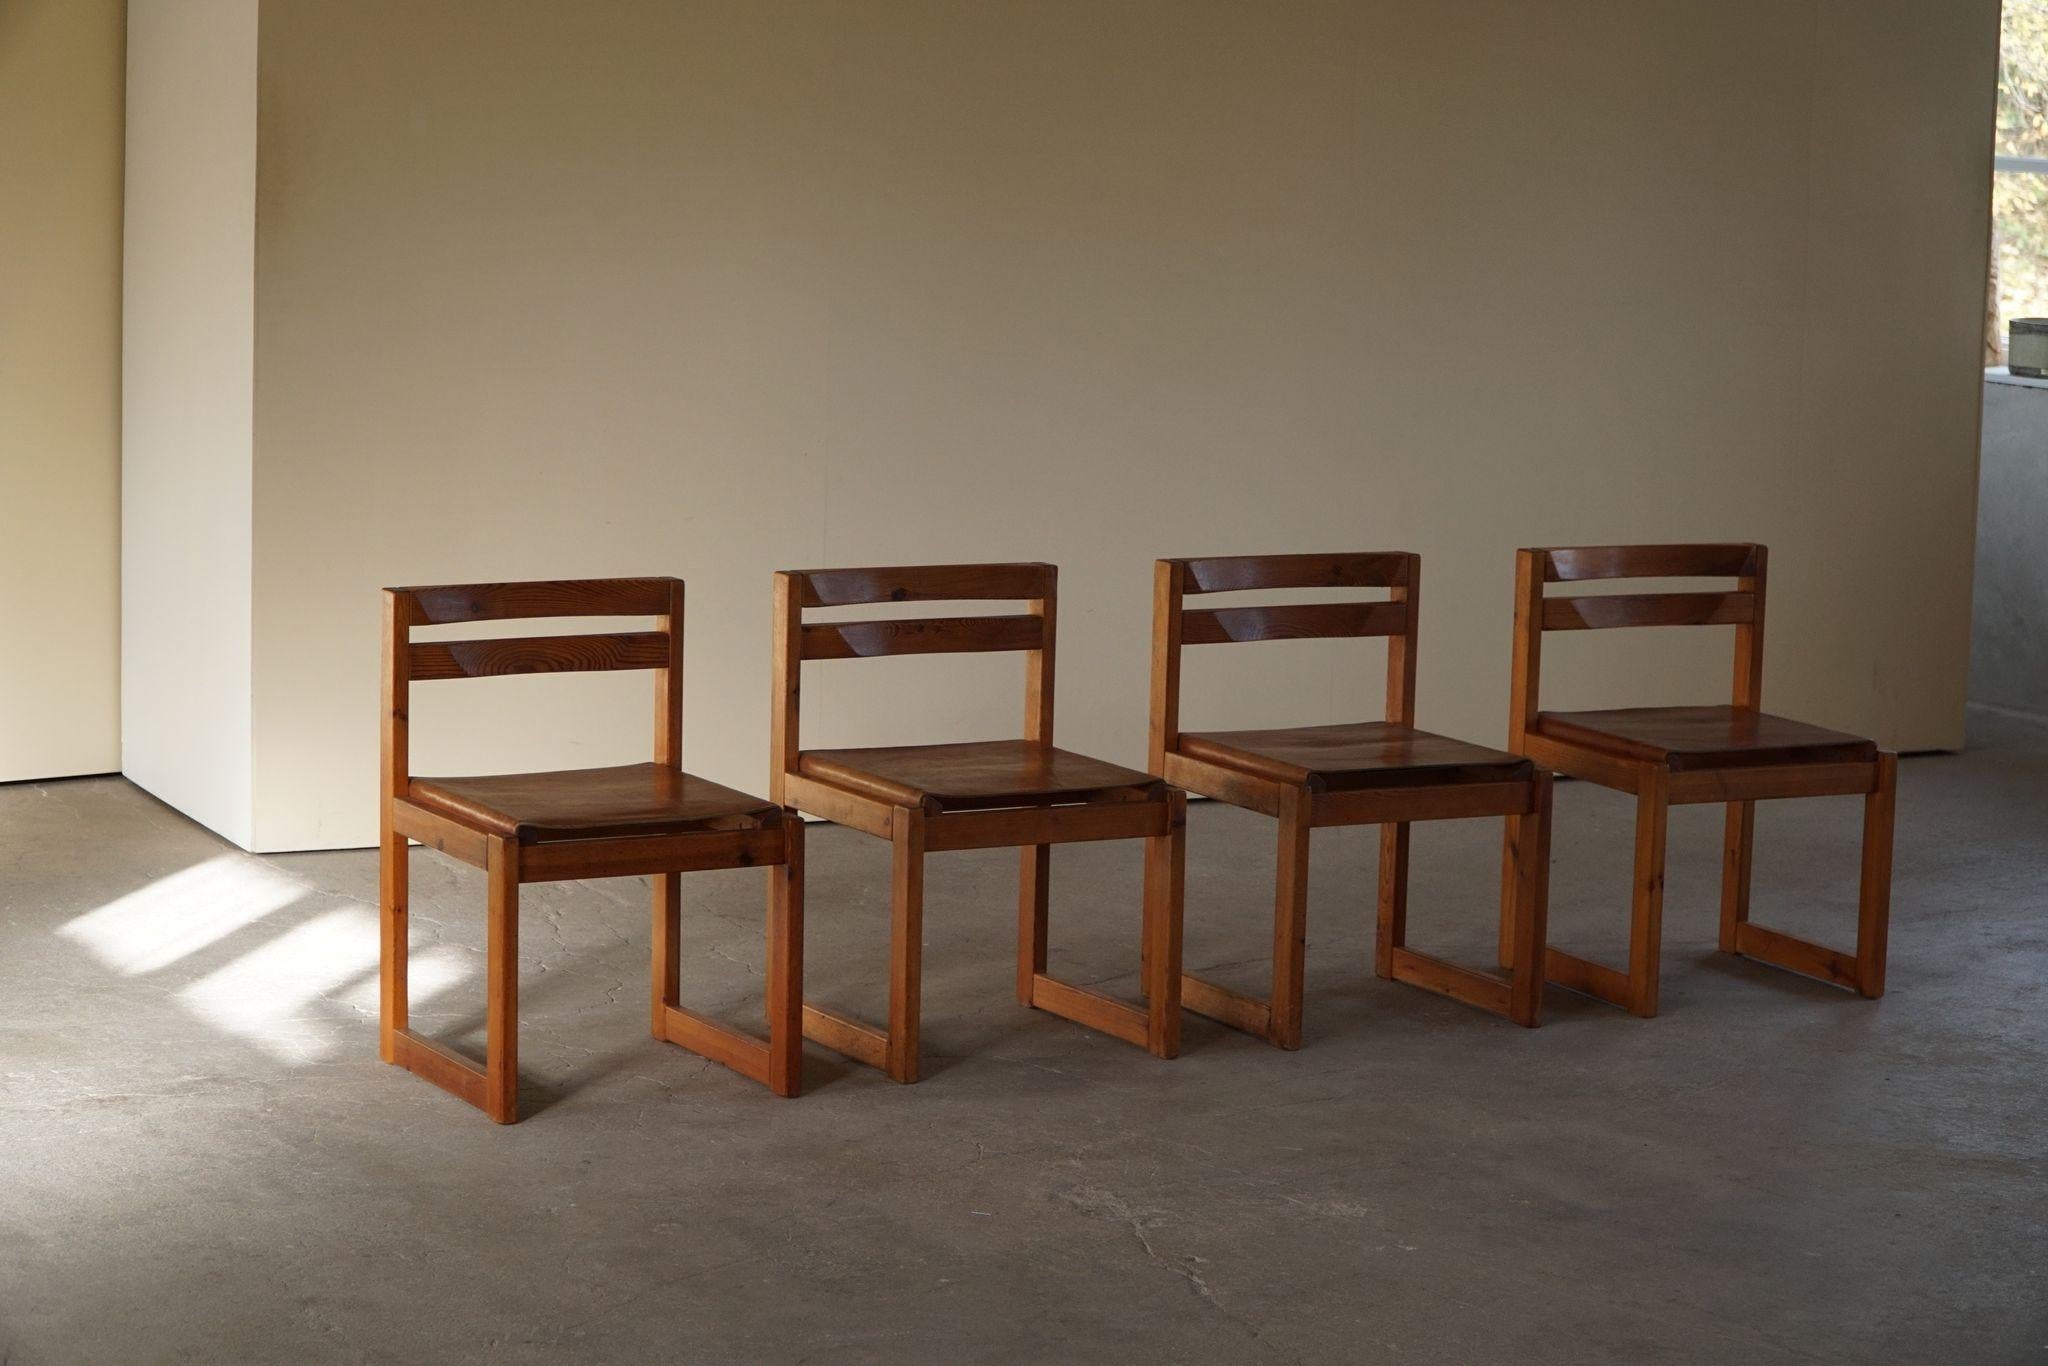 Set of 4, Danish Modern Dining Chairs in Pine and Leather, by Knud Færch, 1970s For Sale 5